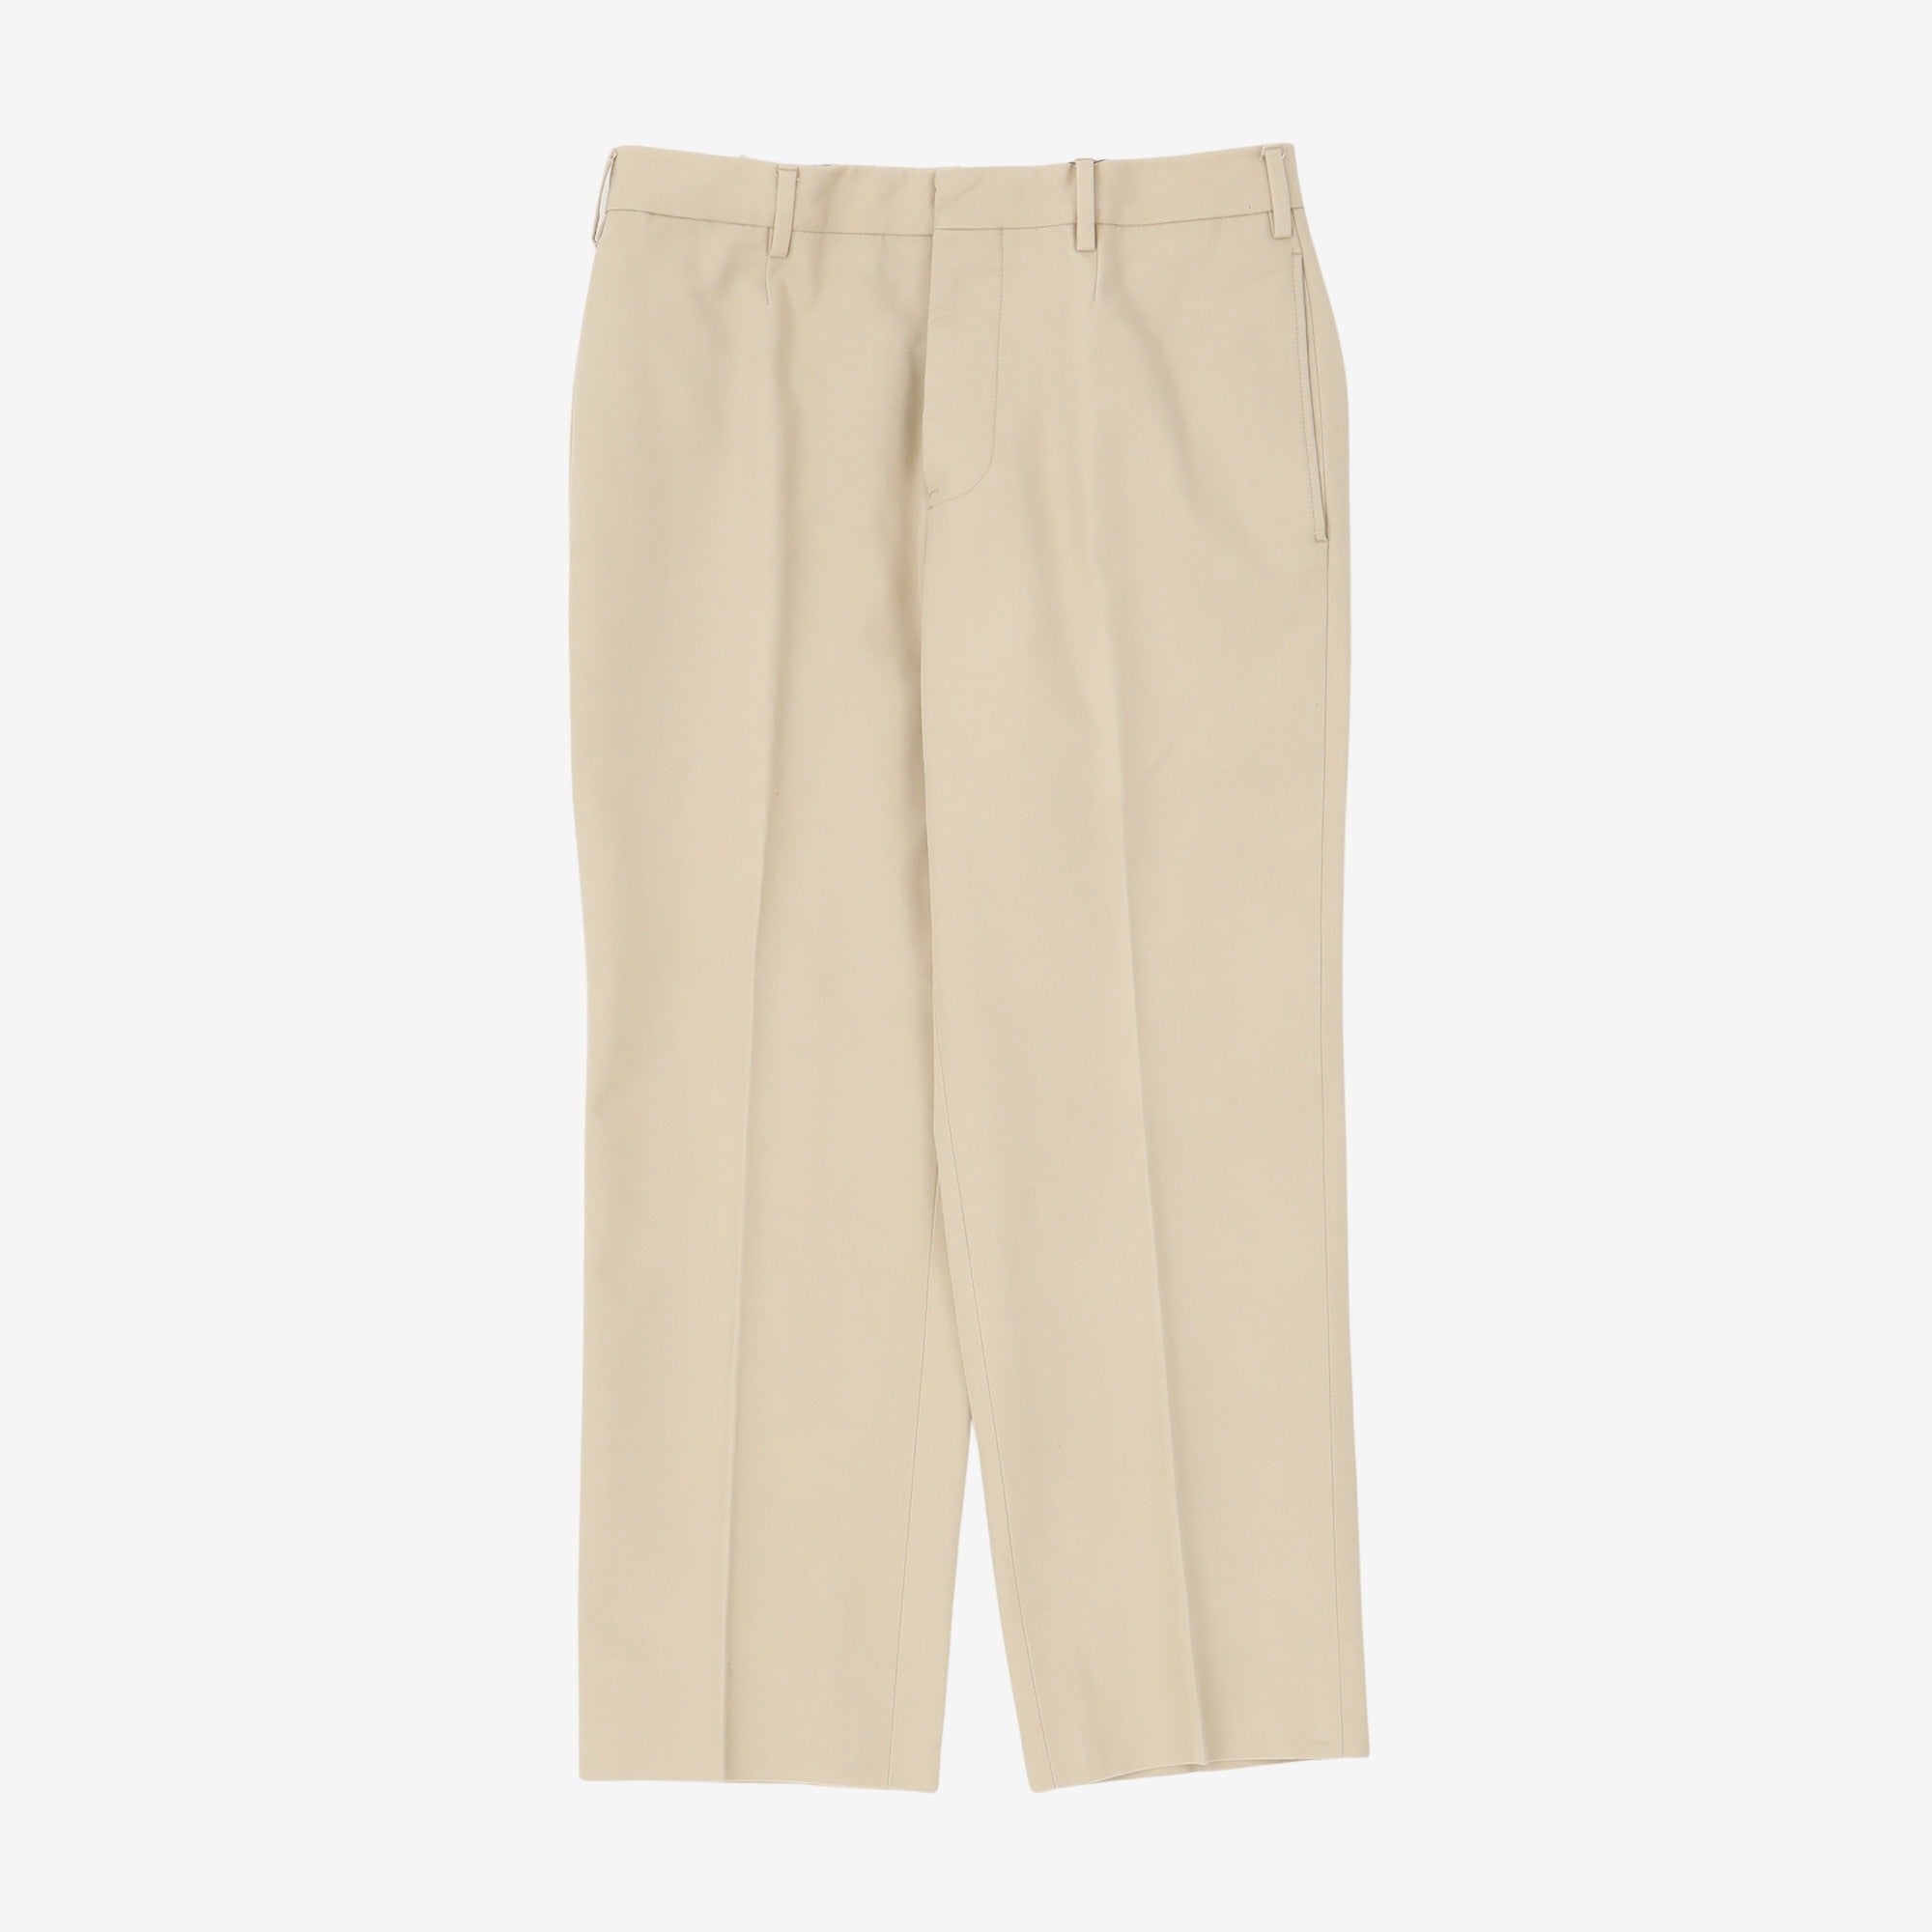 Pleated Formal Chinos